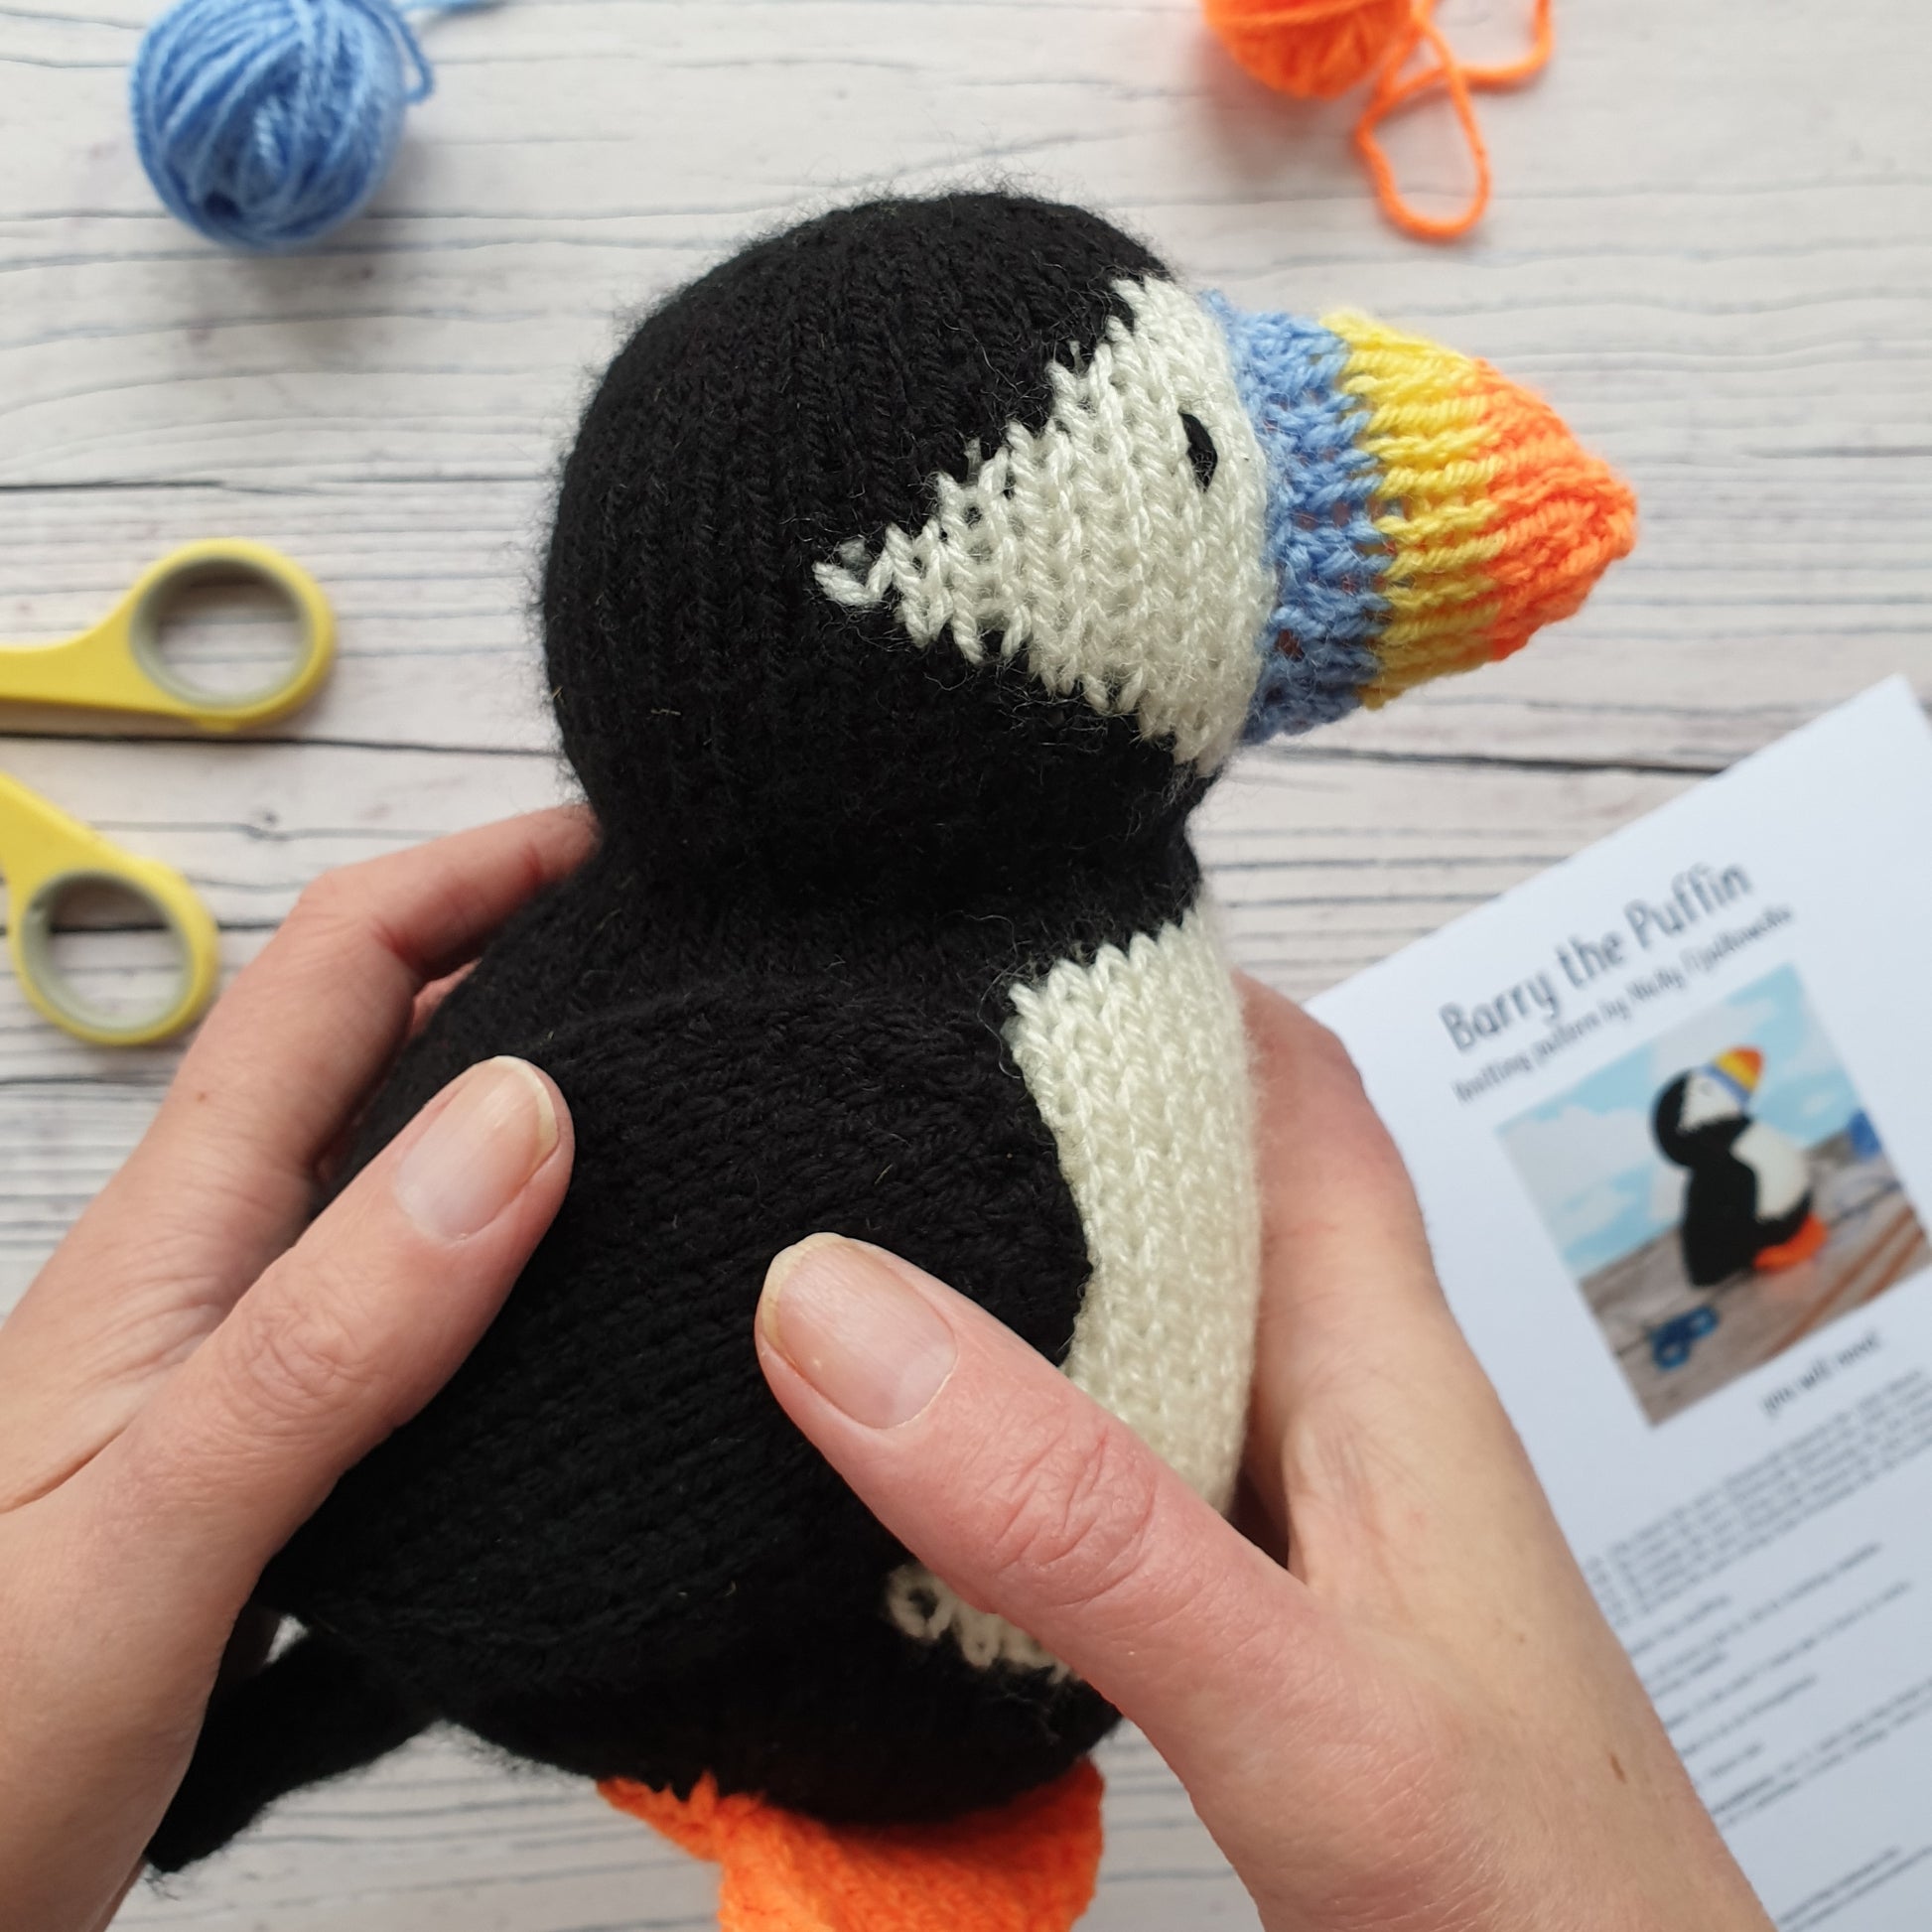 knitted puffin made from a knit kit